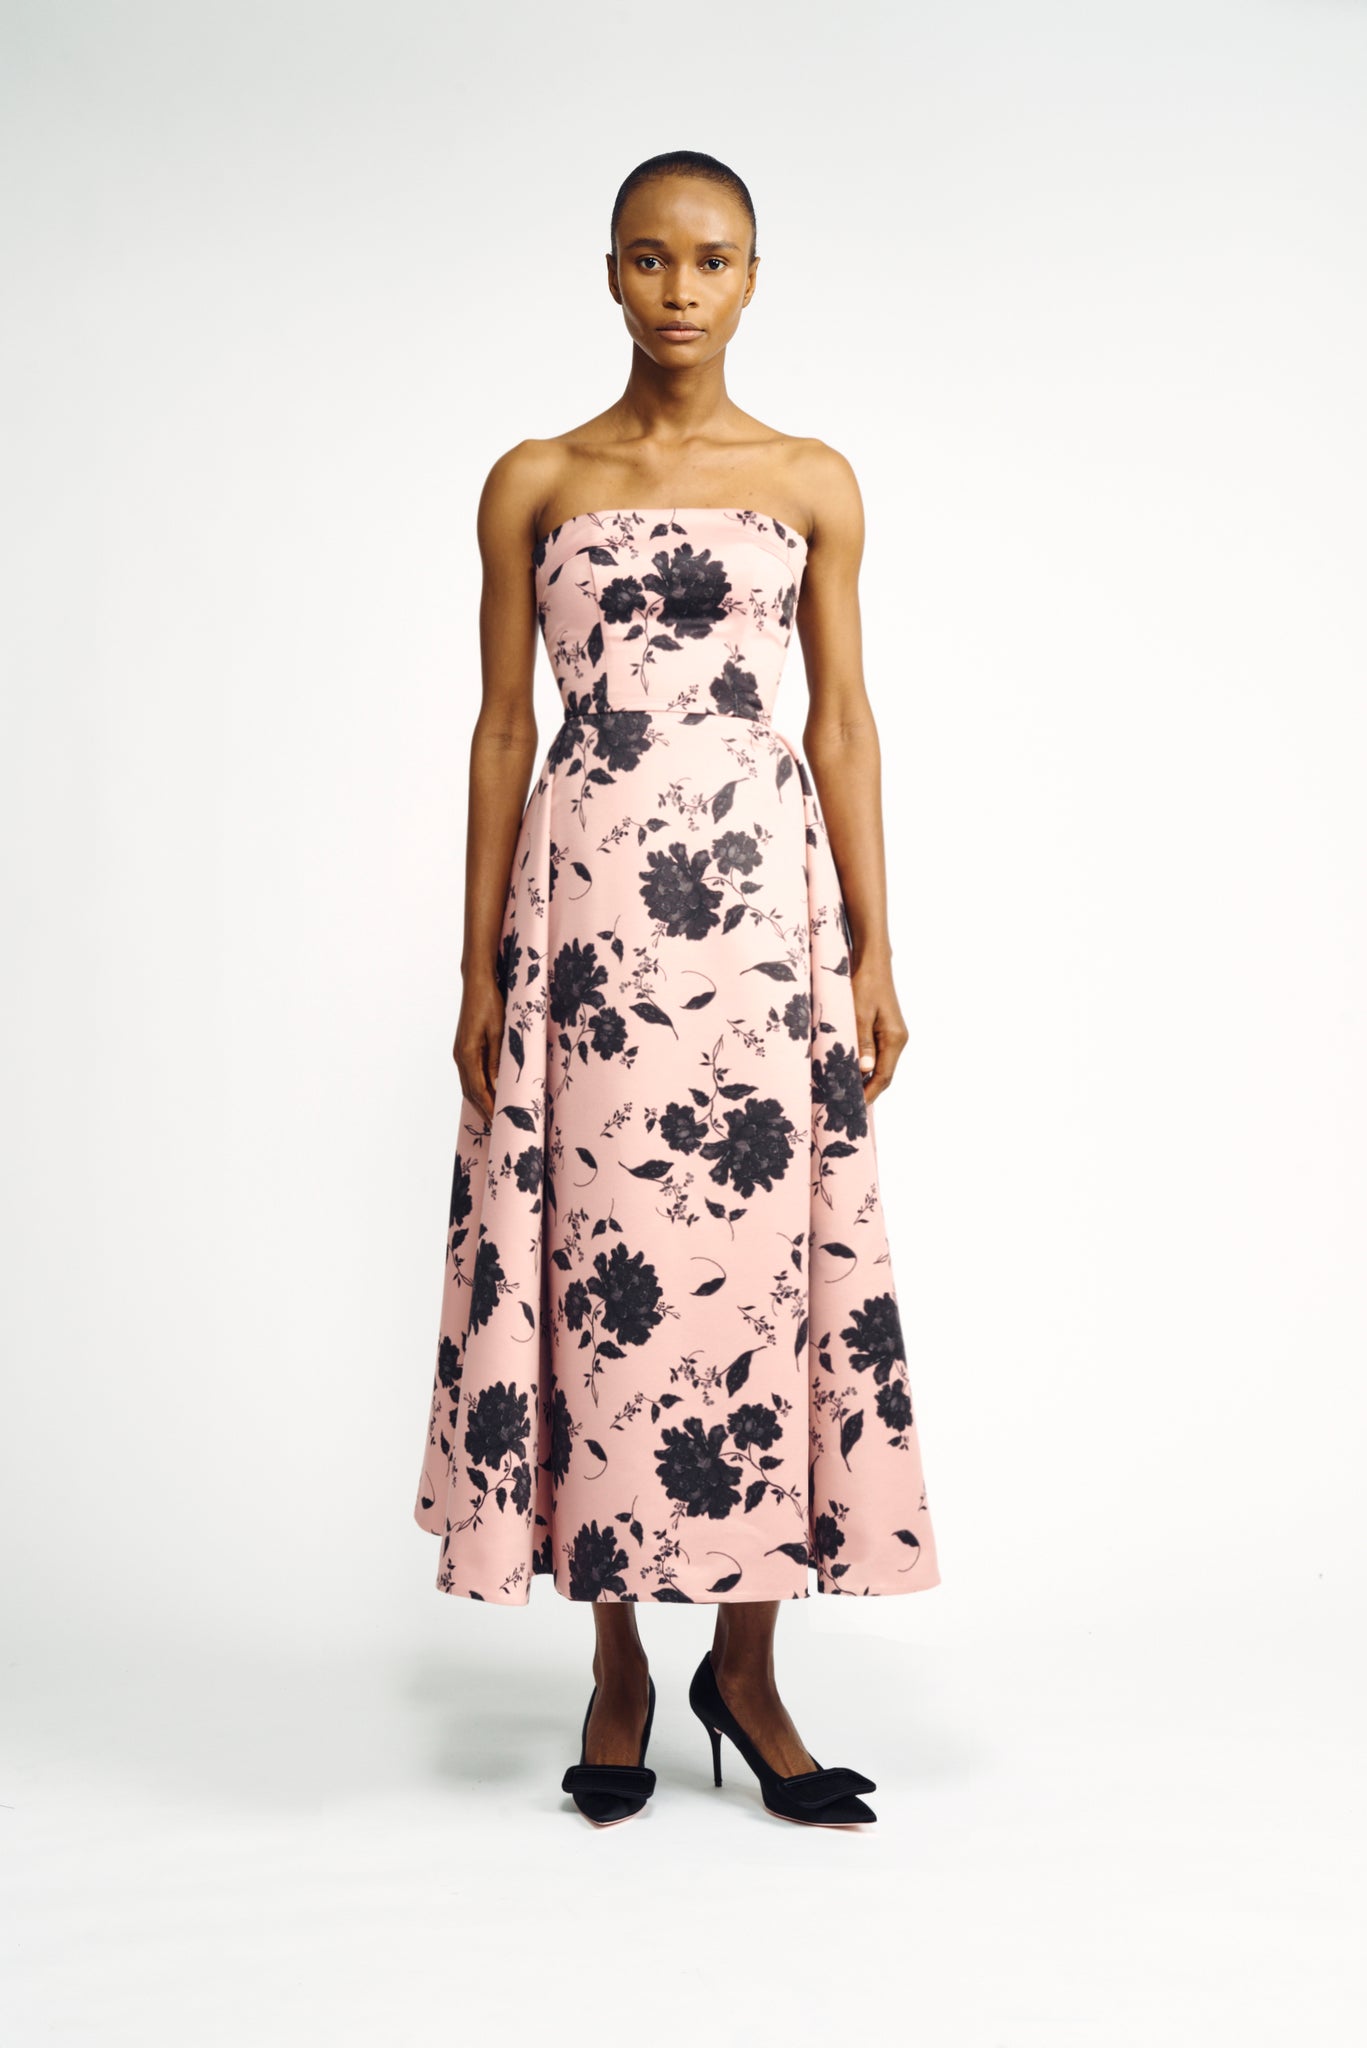 Samuelle Dress | Pink and Black Floral Printed Strapless Fit-and-Flare Dress | Emilia Wickstead